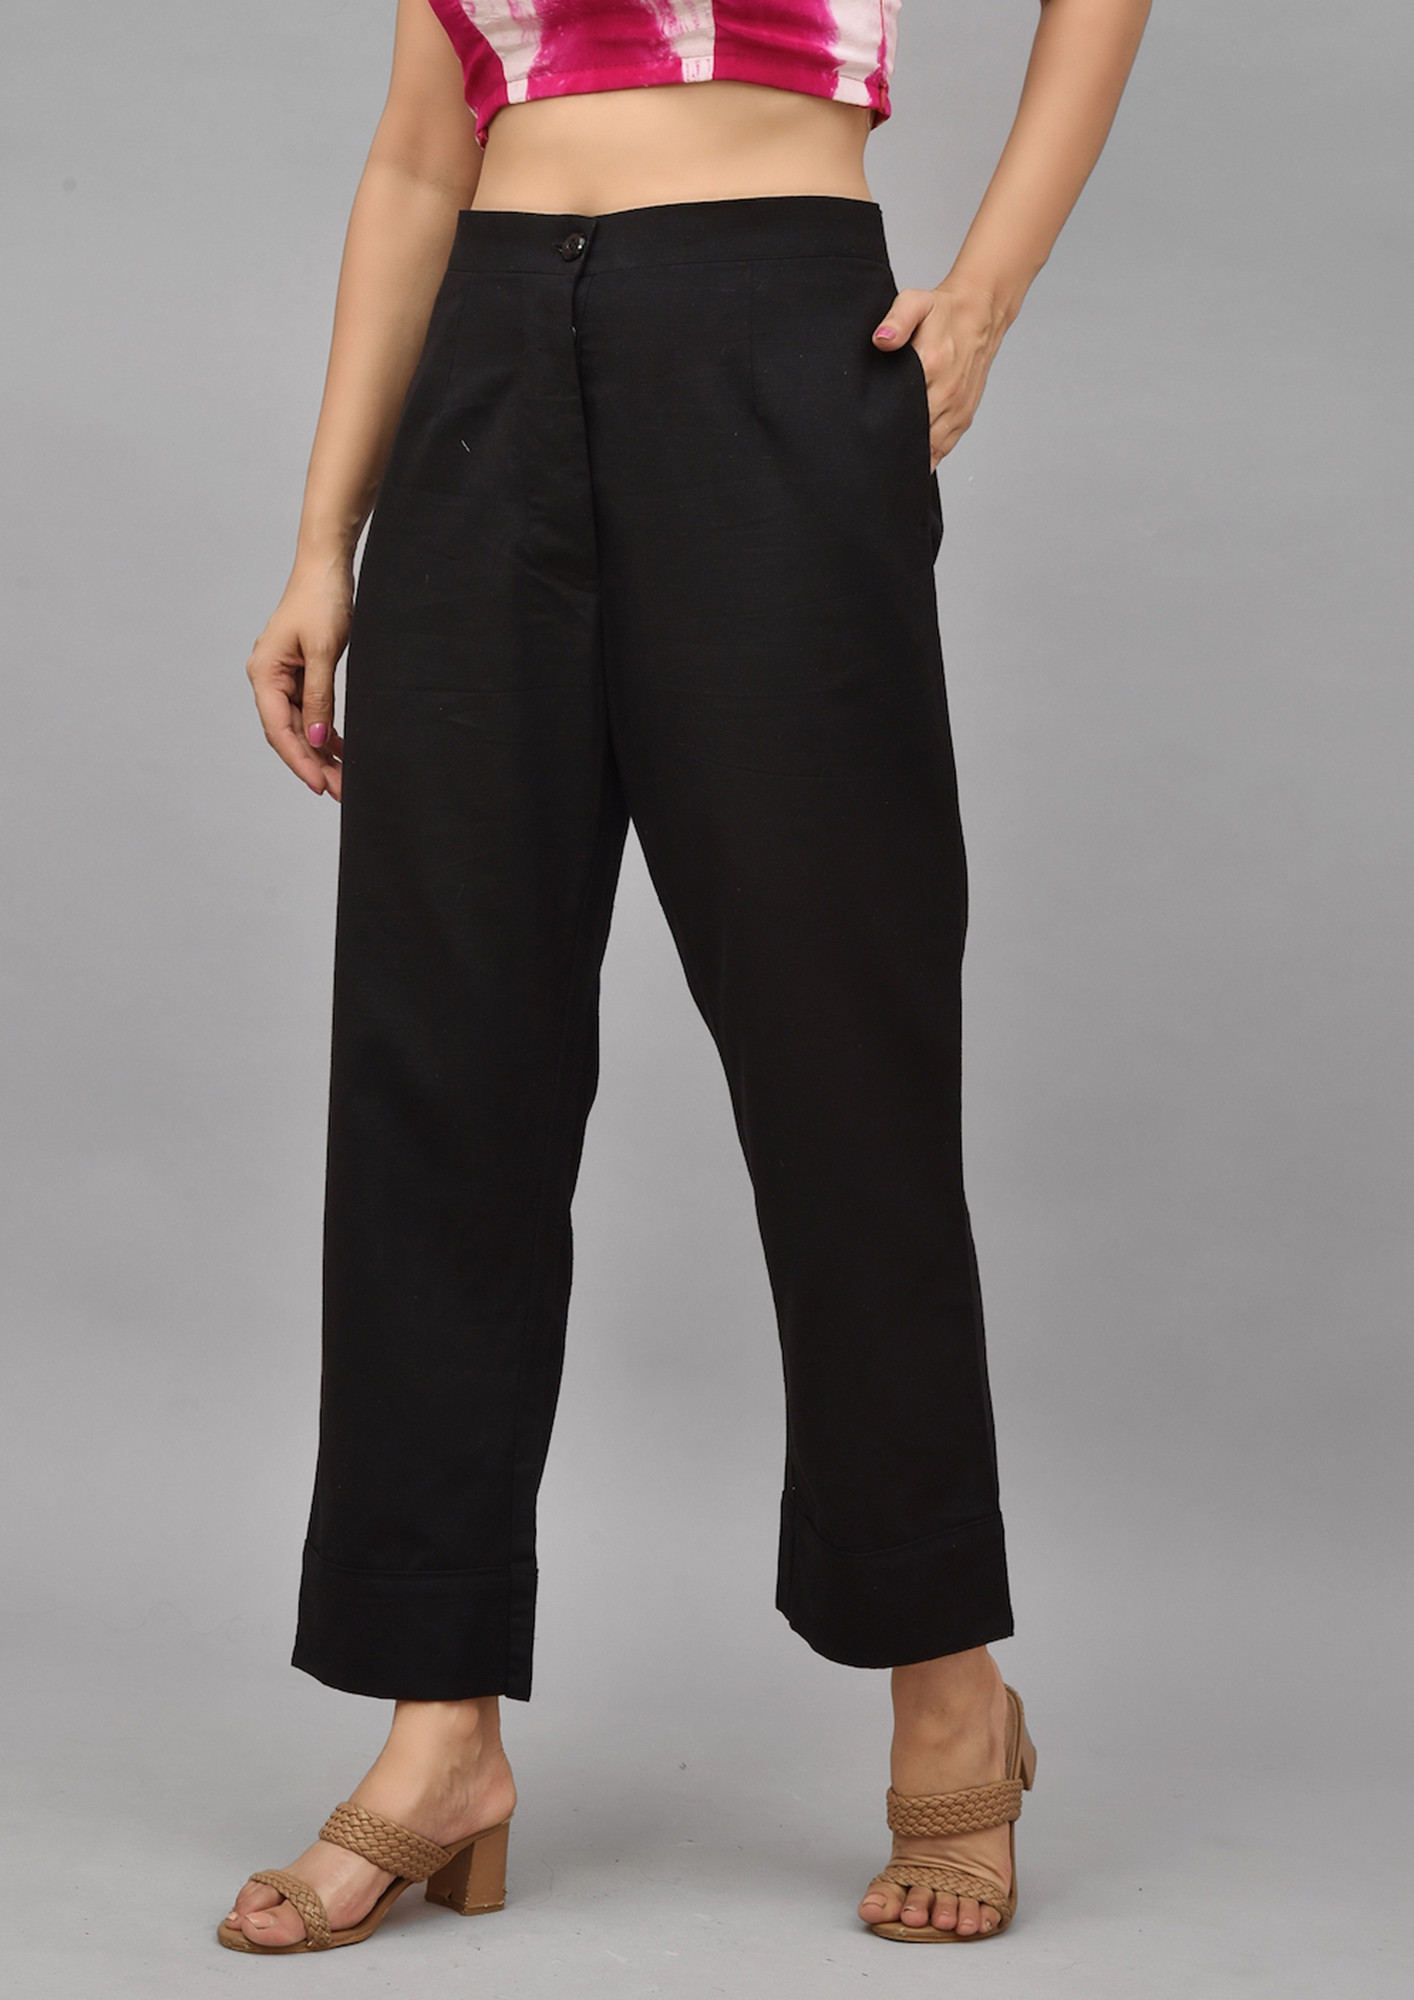 Parallel Lines Tailored Pants With Wrap Front | ASOS | Casual trousers women,  Chino pants women, Pants for women